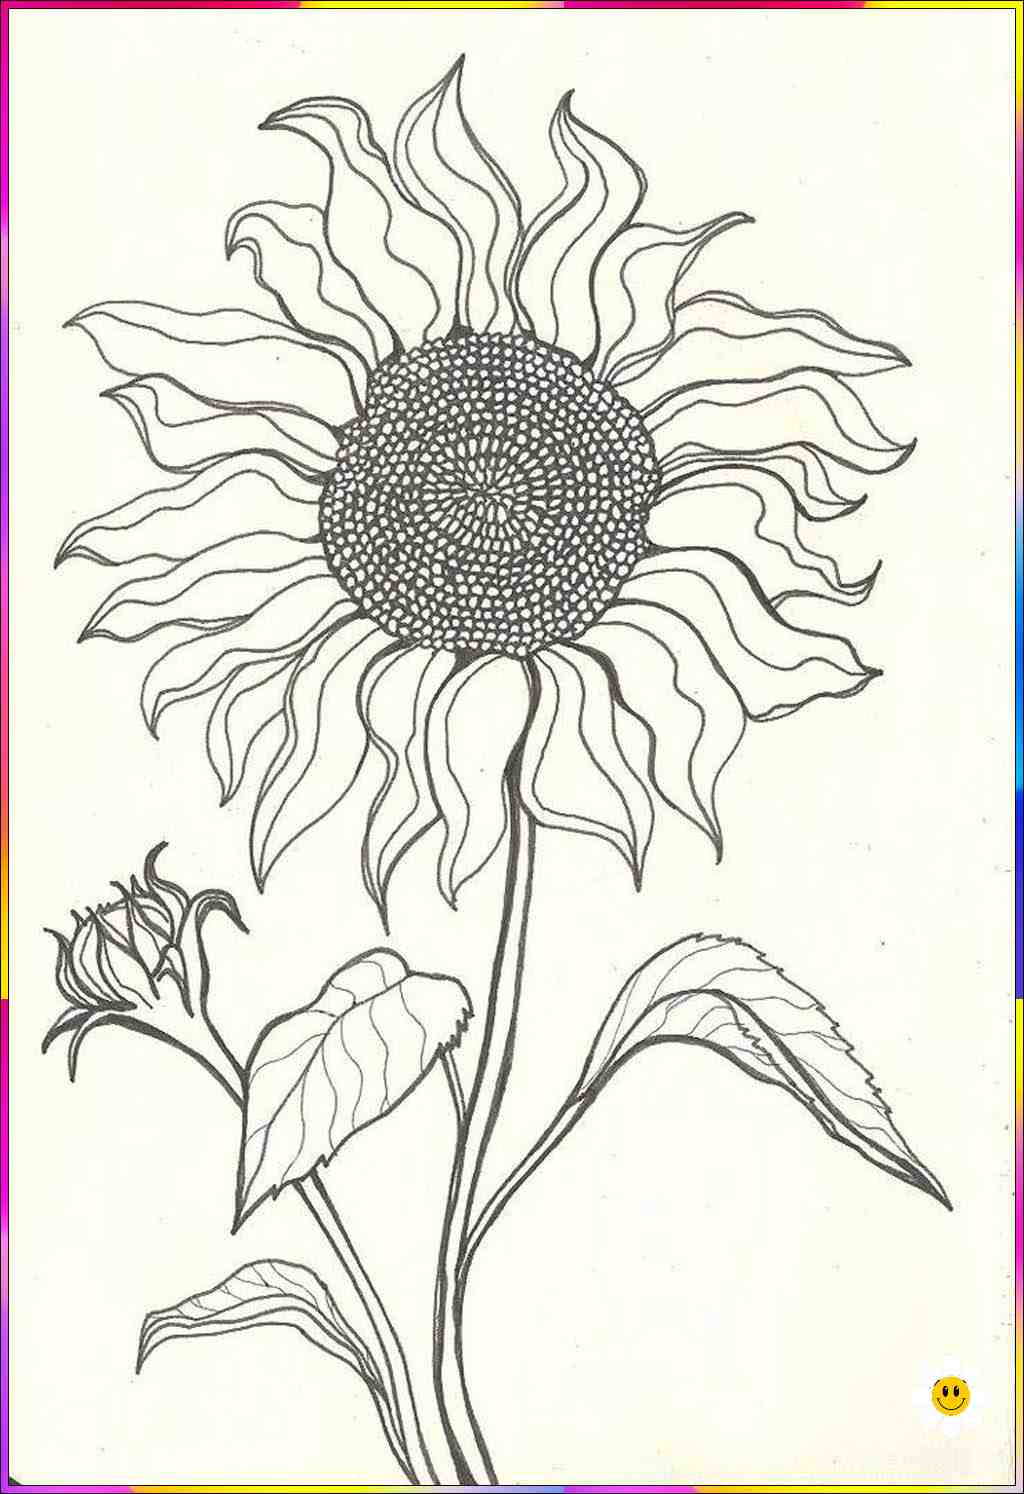 a flower drawing
